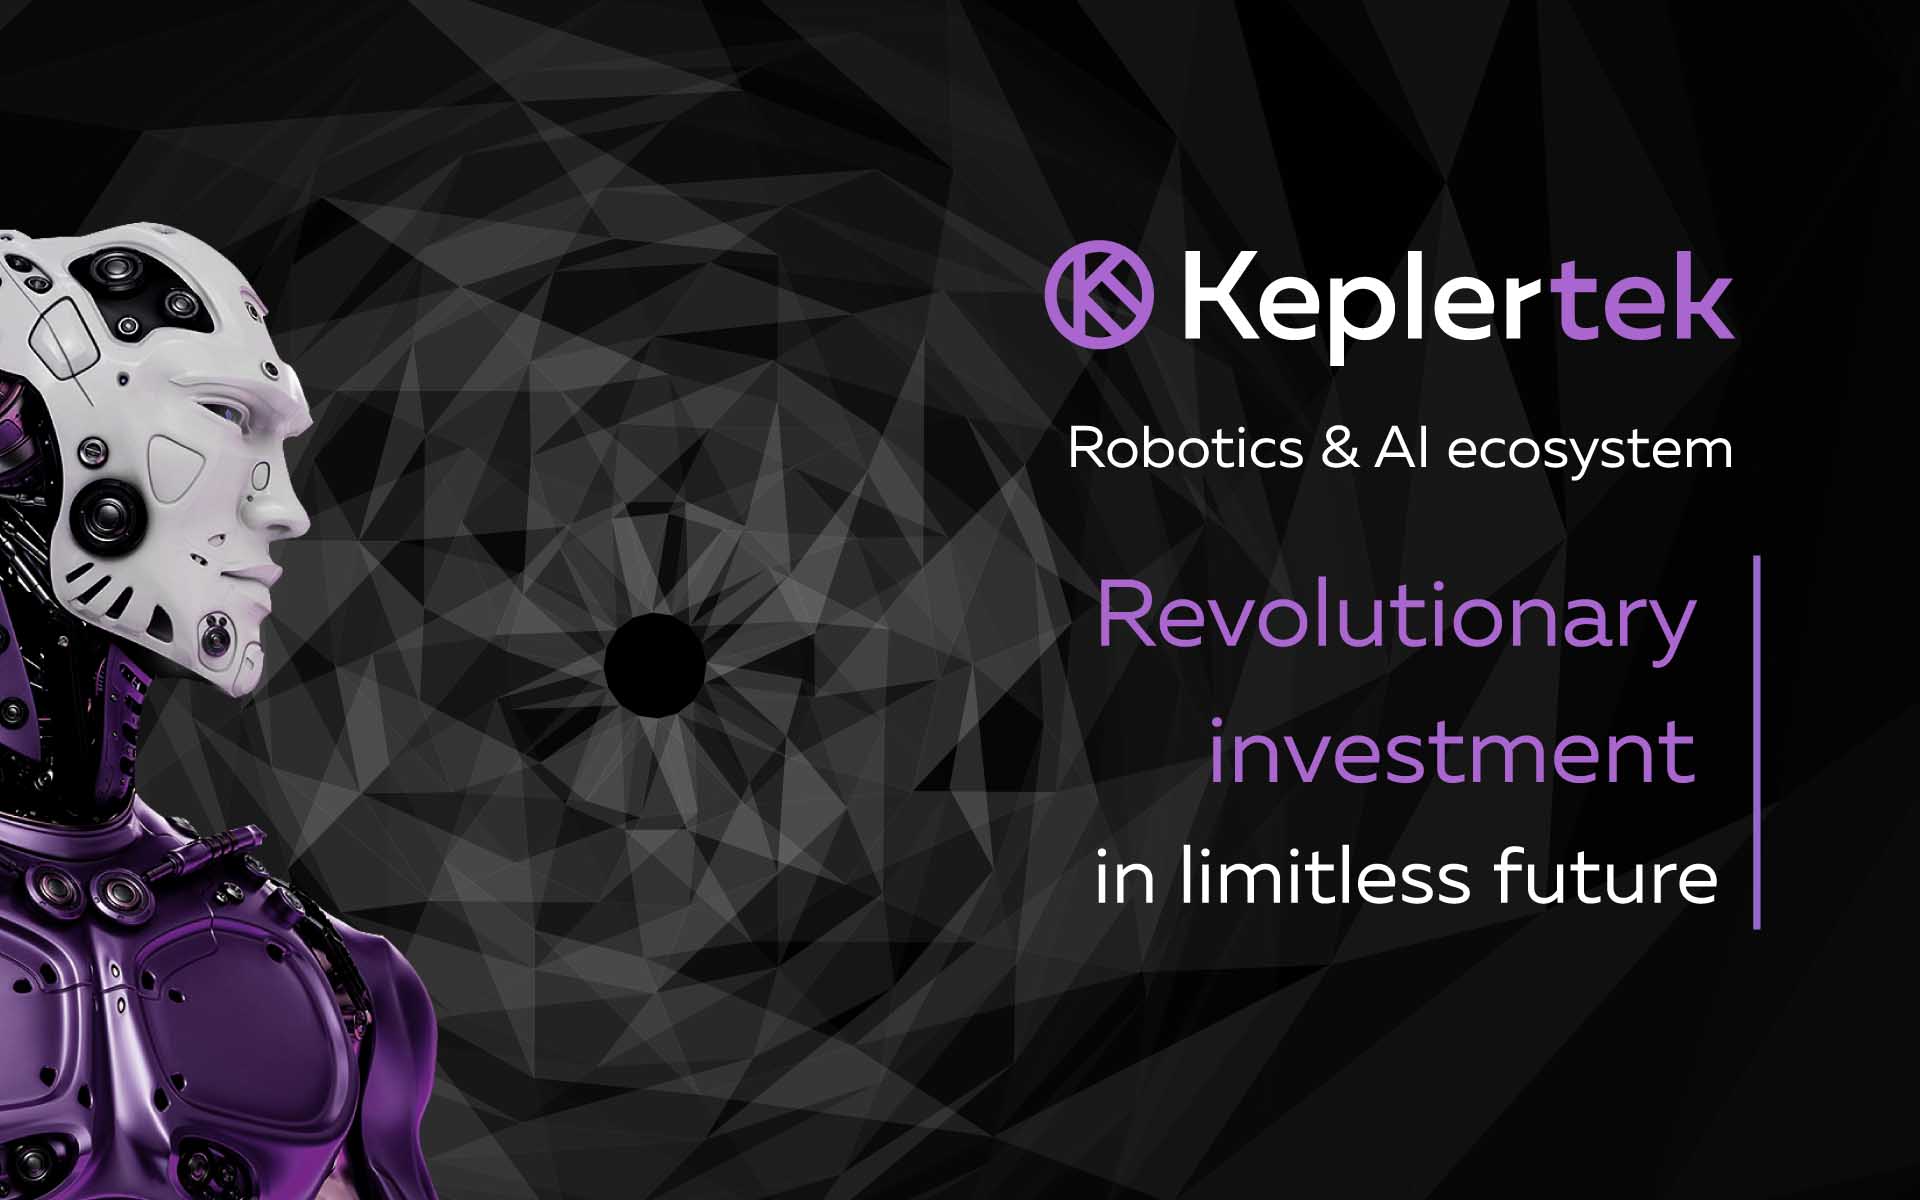 Kepler Technologies - Highest Rated ICO About to Start Pre-Sale